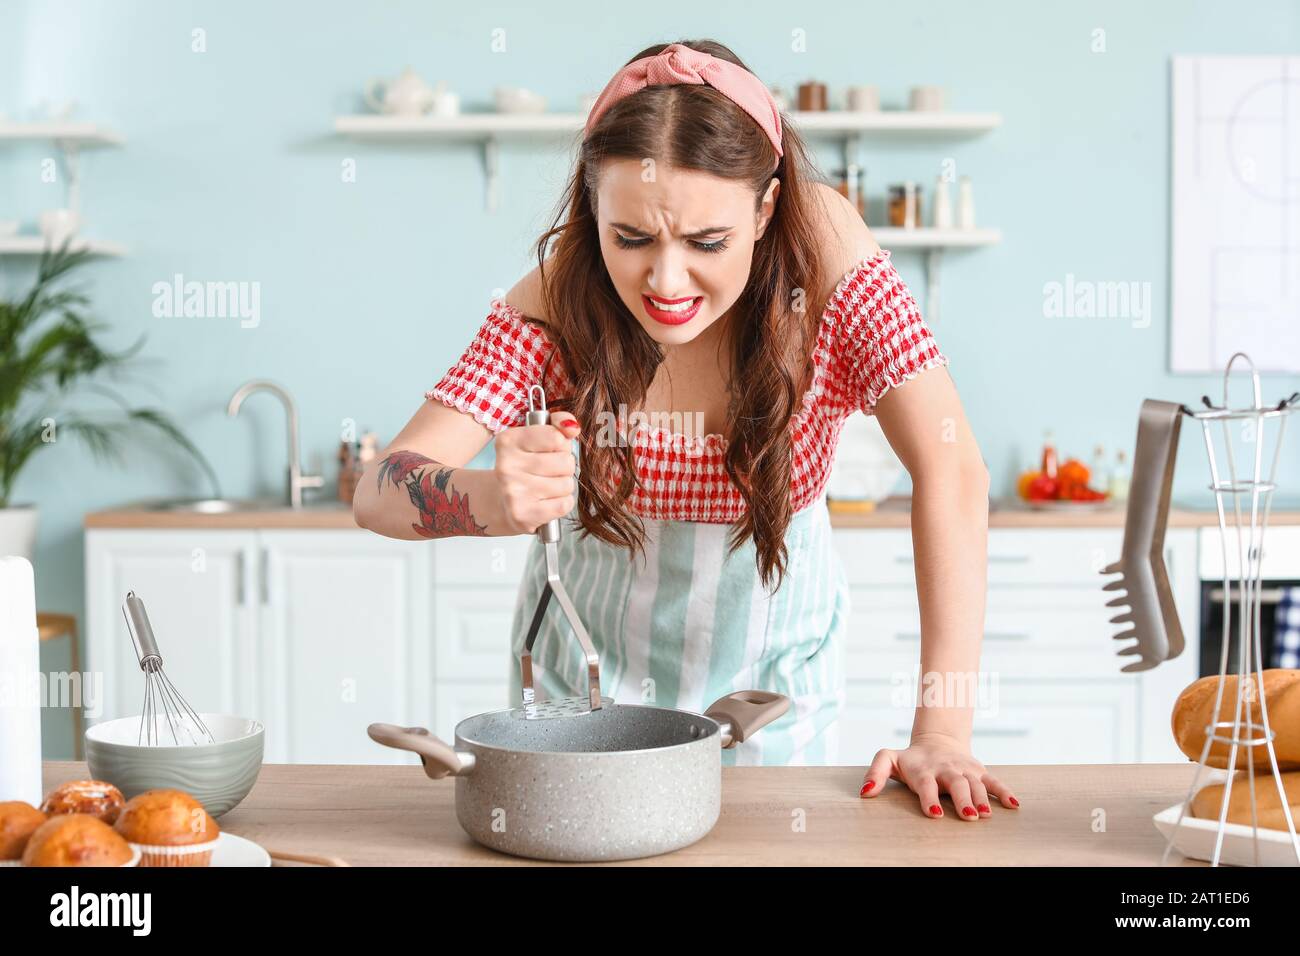 Funny Kitchen Stock Photos - 190,742 Images